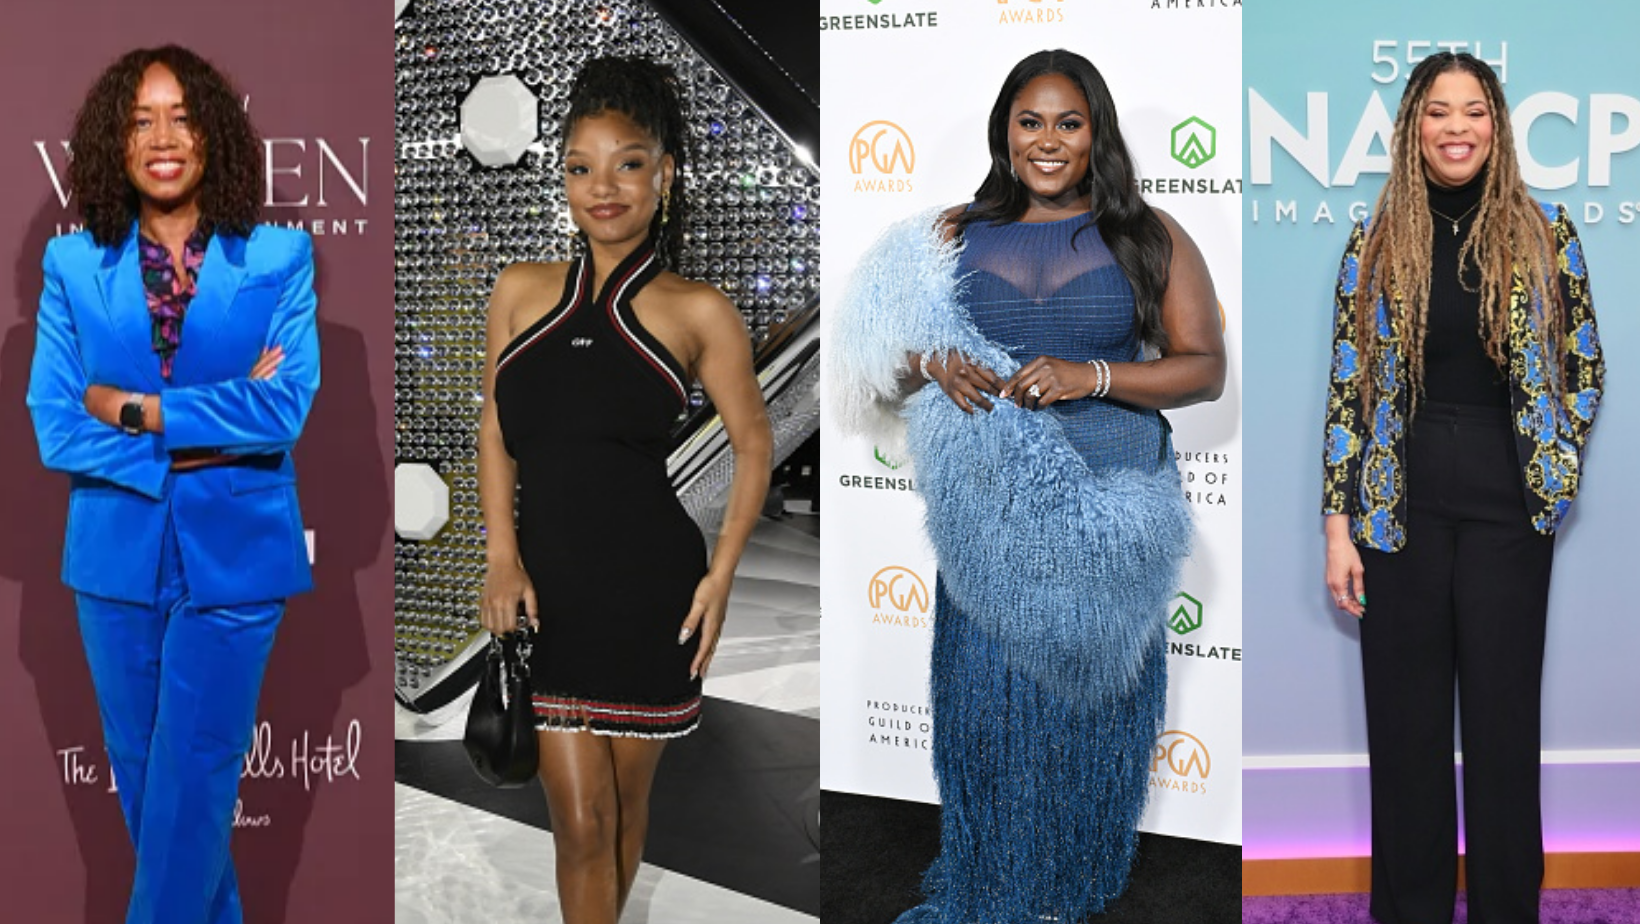 ESSENCE' To Celebrate Black Women In Hollywood